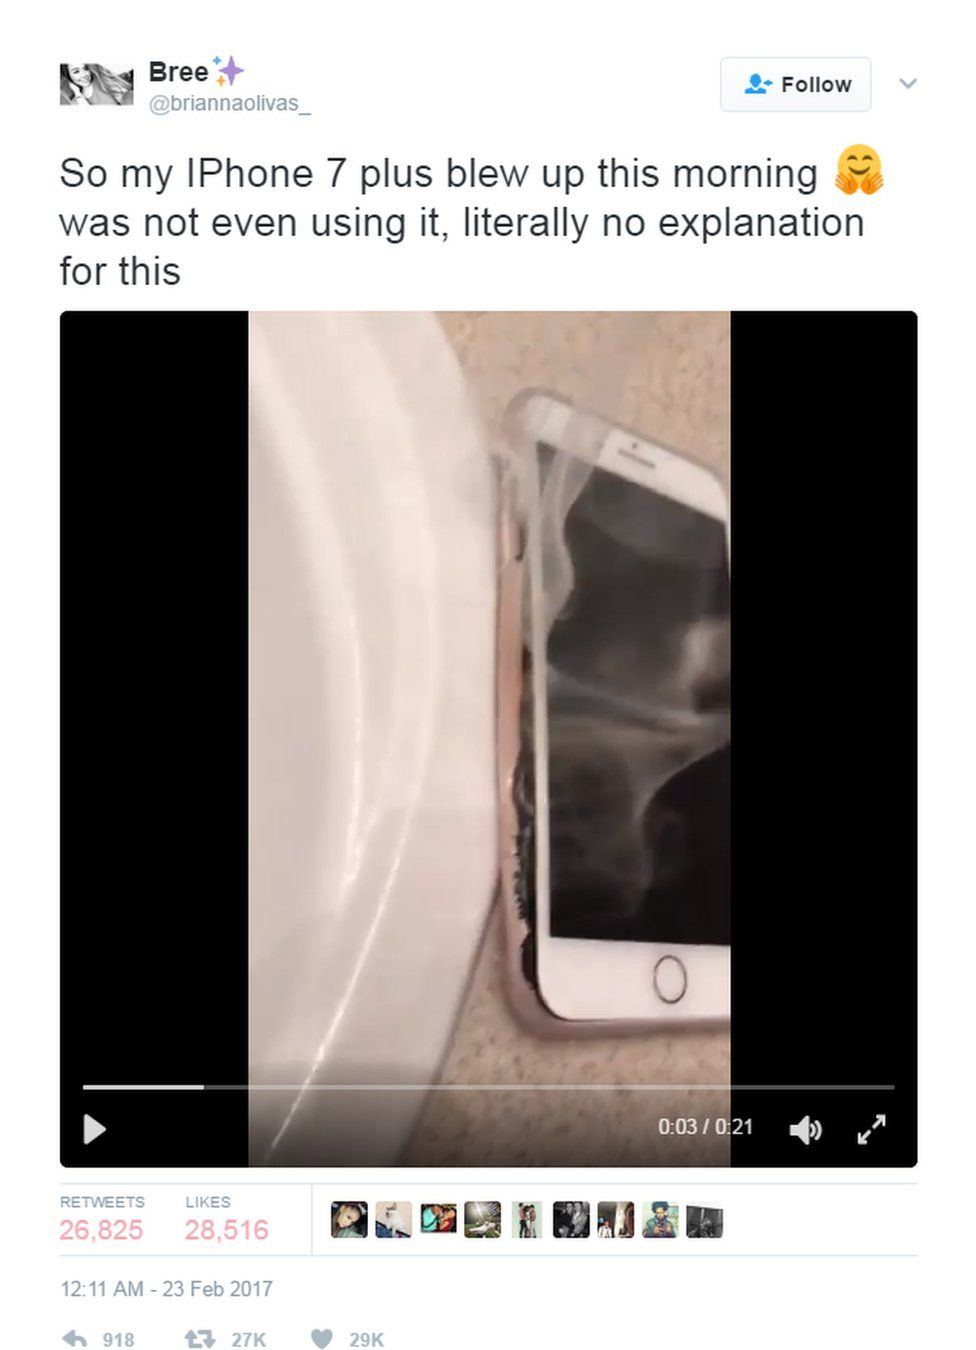 @BriannaOlivas_ tweeted: "So my iPhone 7 plus blew up this morning. I was not even using it, literally no explanation for this".